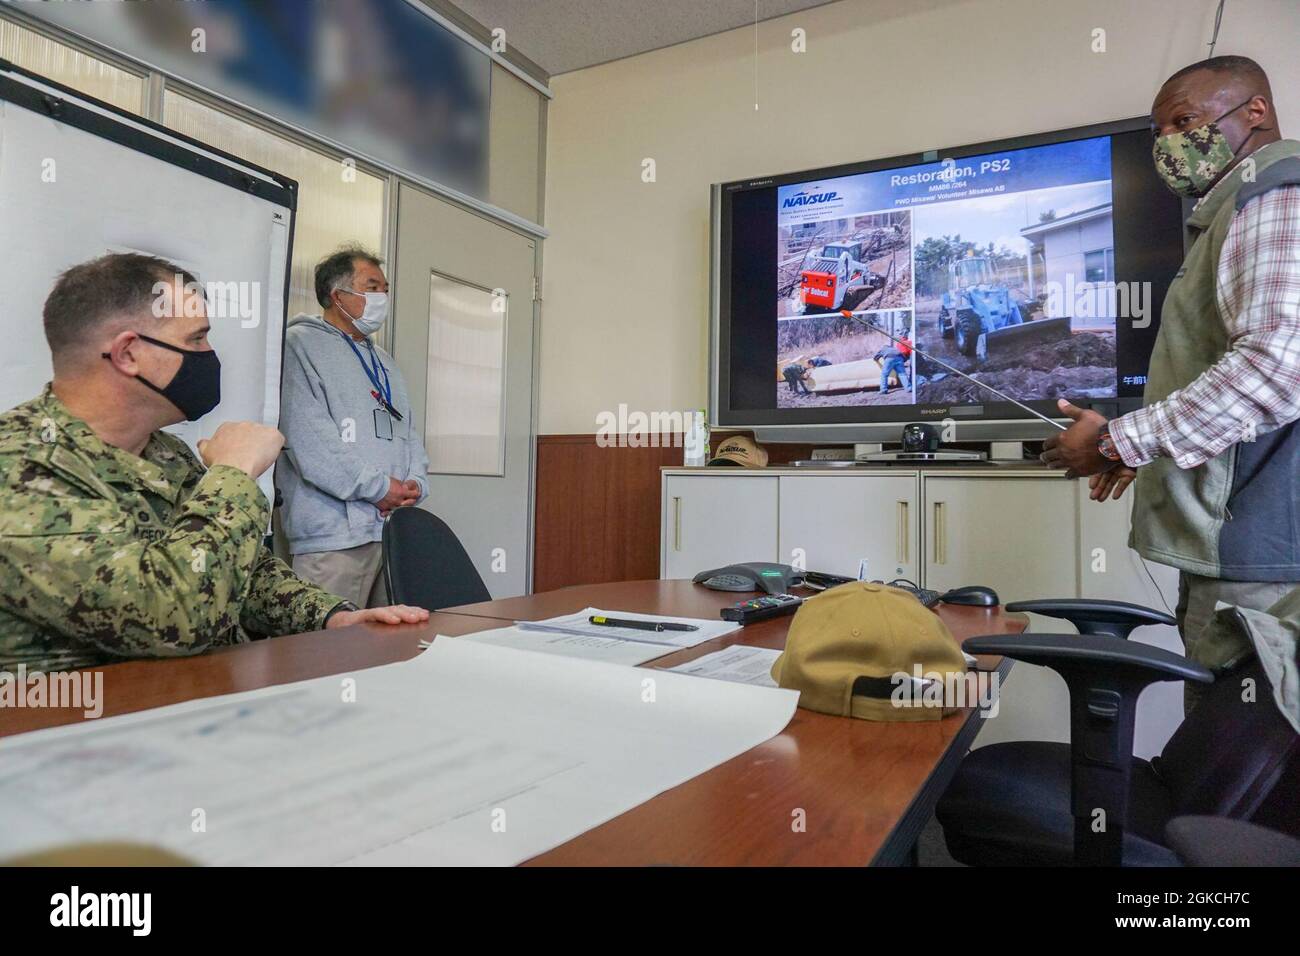 HACHINOHE, Japan (March 12, 2021) - NAVSUP Fleet Logistics Center Yokosuka Commanding Officer Capt. Edward Pidgeon (left) is briefed on Defense Fuel Service Point Hachinohe's operations after the facility was damaged by a tsunami 10 years earlier. Stock Photo